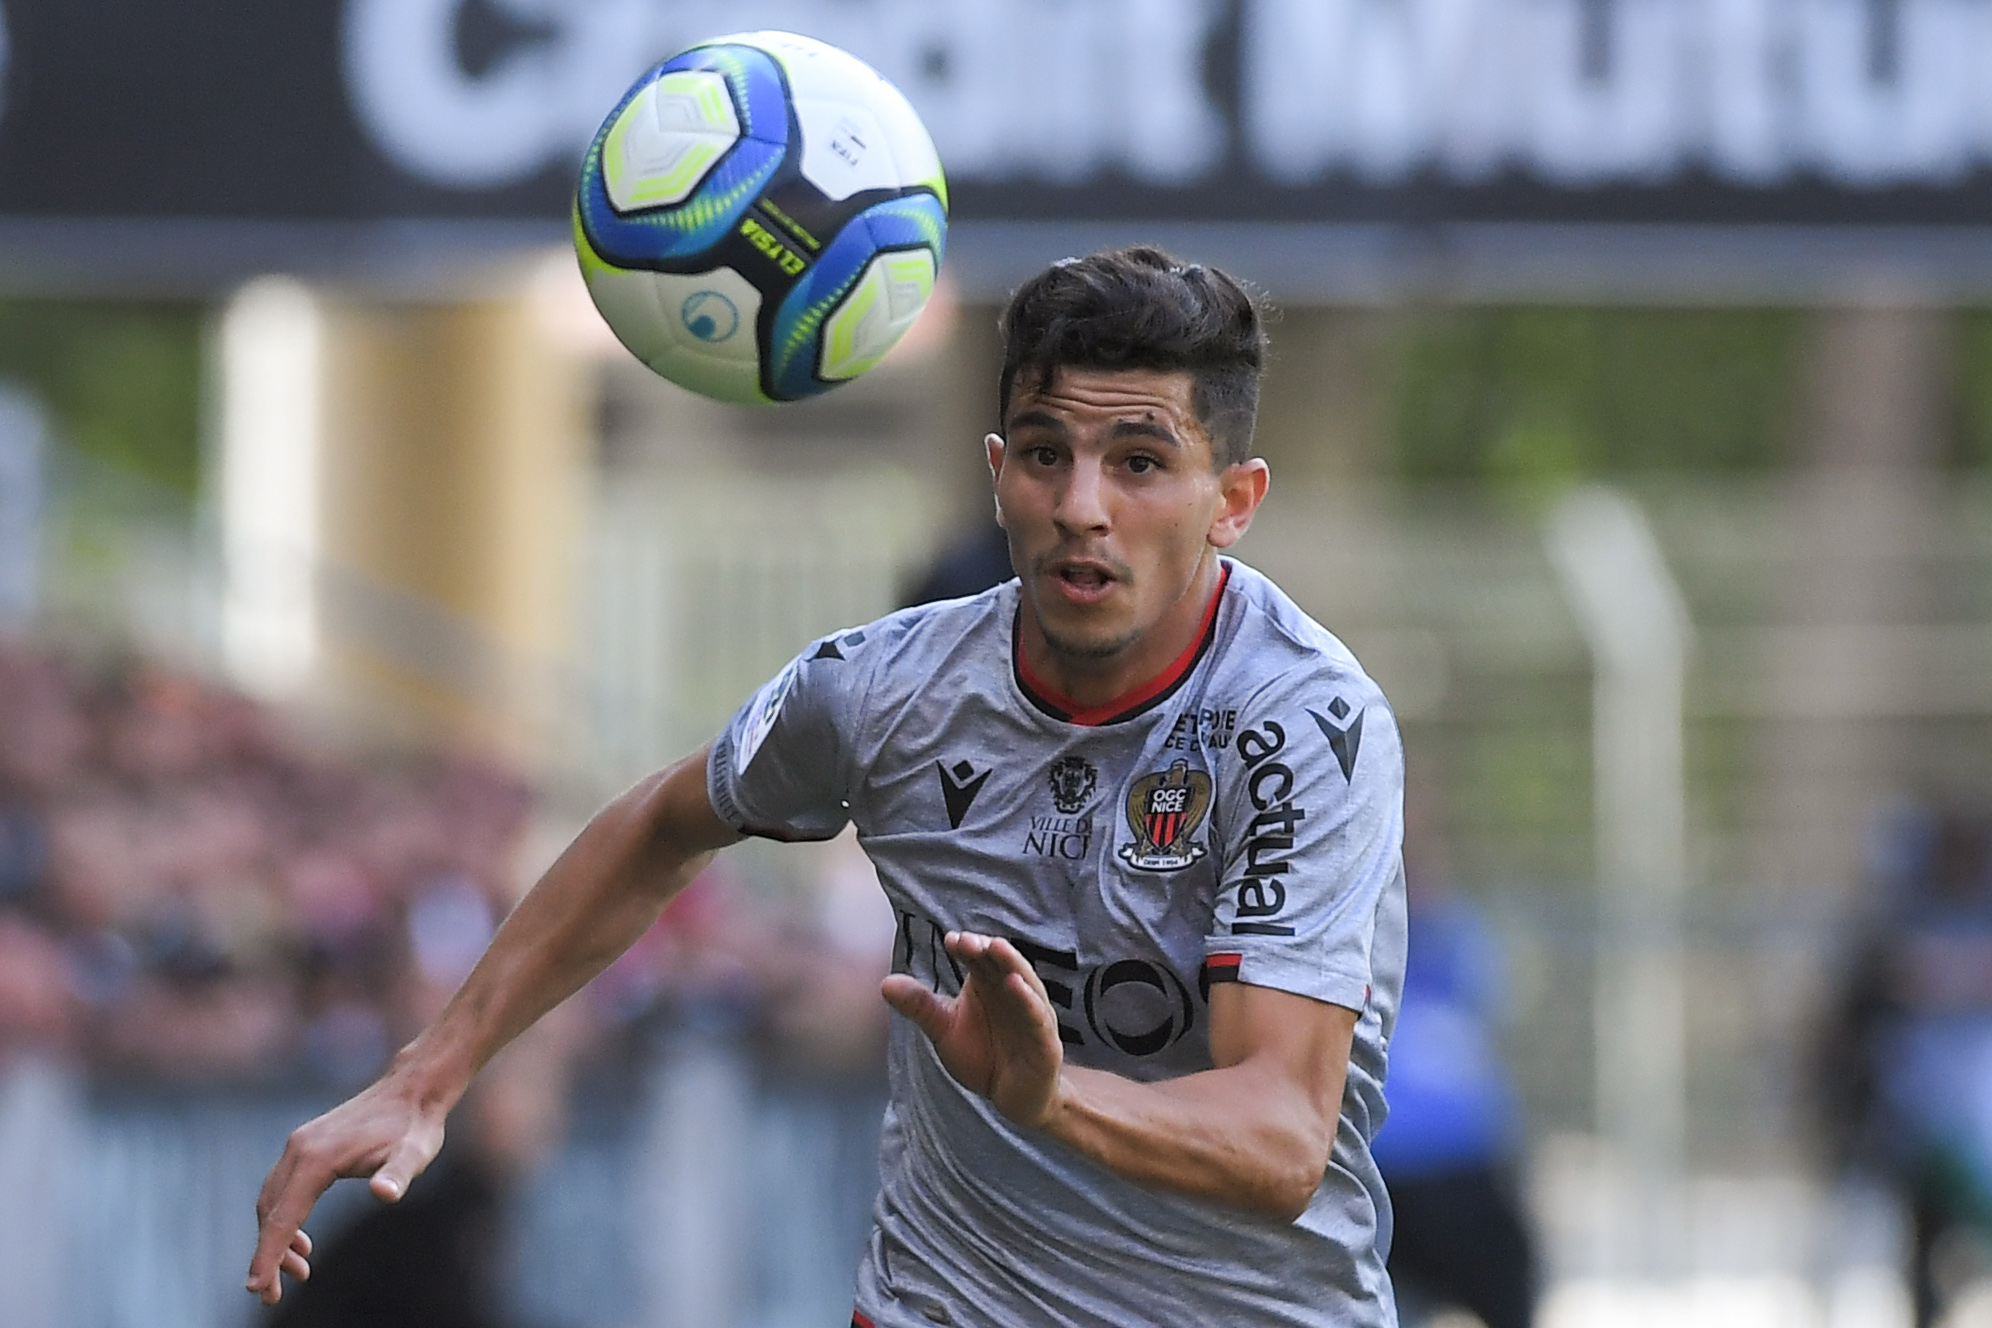 Nice's Algerian defender Youcef Atal eyes the ball during the French L1 football match Stade Rennais vs Nice, on September 1, 2019 at the Roazhon Park stadium in Rennes, western France. (Photo by LOIC VENANCE / AFP)        (Photo credit should read LOIC VENANCE/AFP/Getty Images)